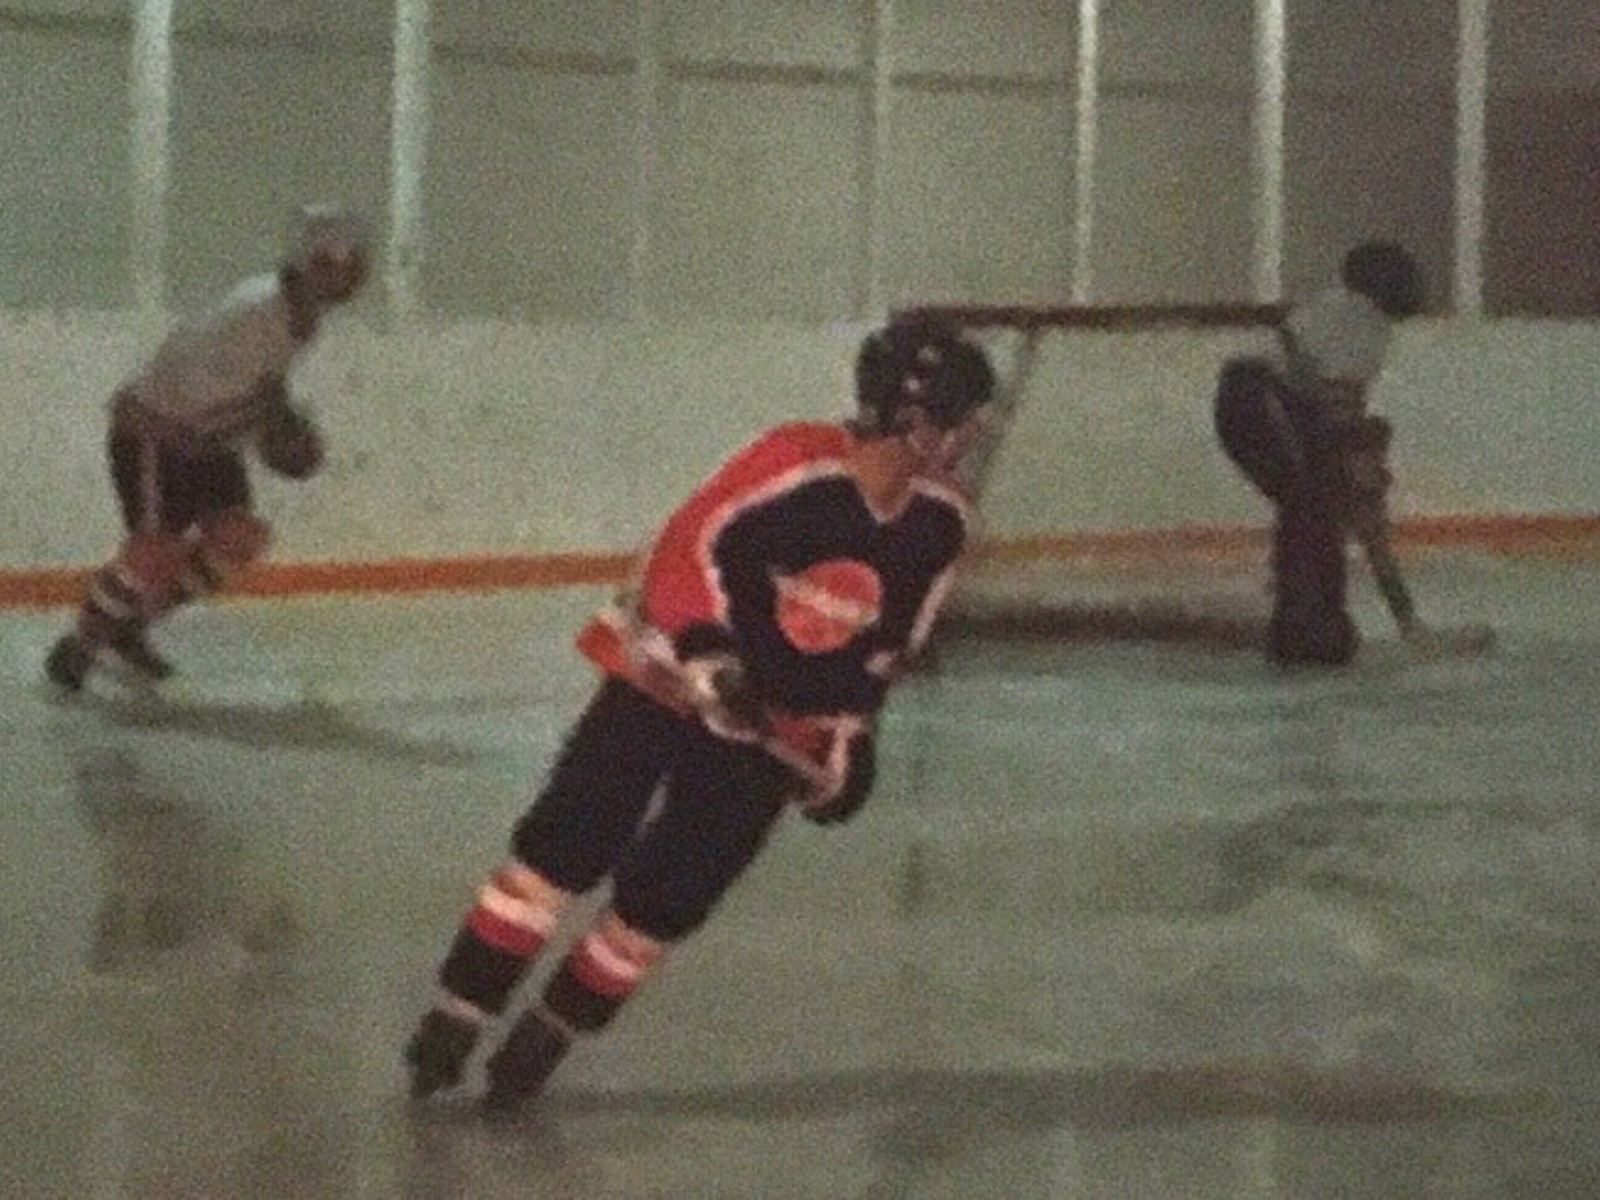 A pixelated colour-film photograph showing three hockey players on the ice of an indoor rink. The player in the centre, Allan Merko, is wearing a dark coloured jersey with red accents and a black helmet.